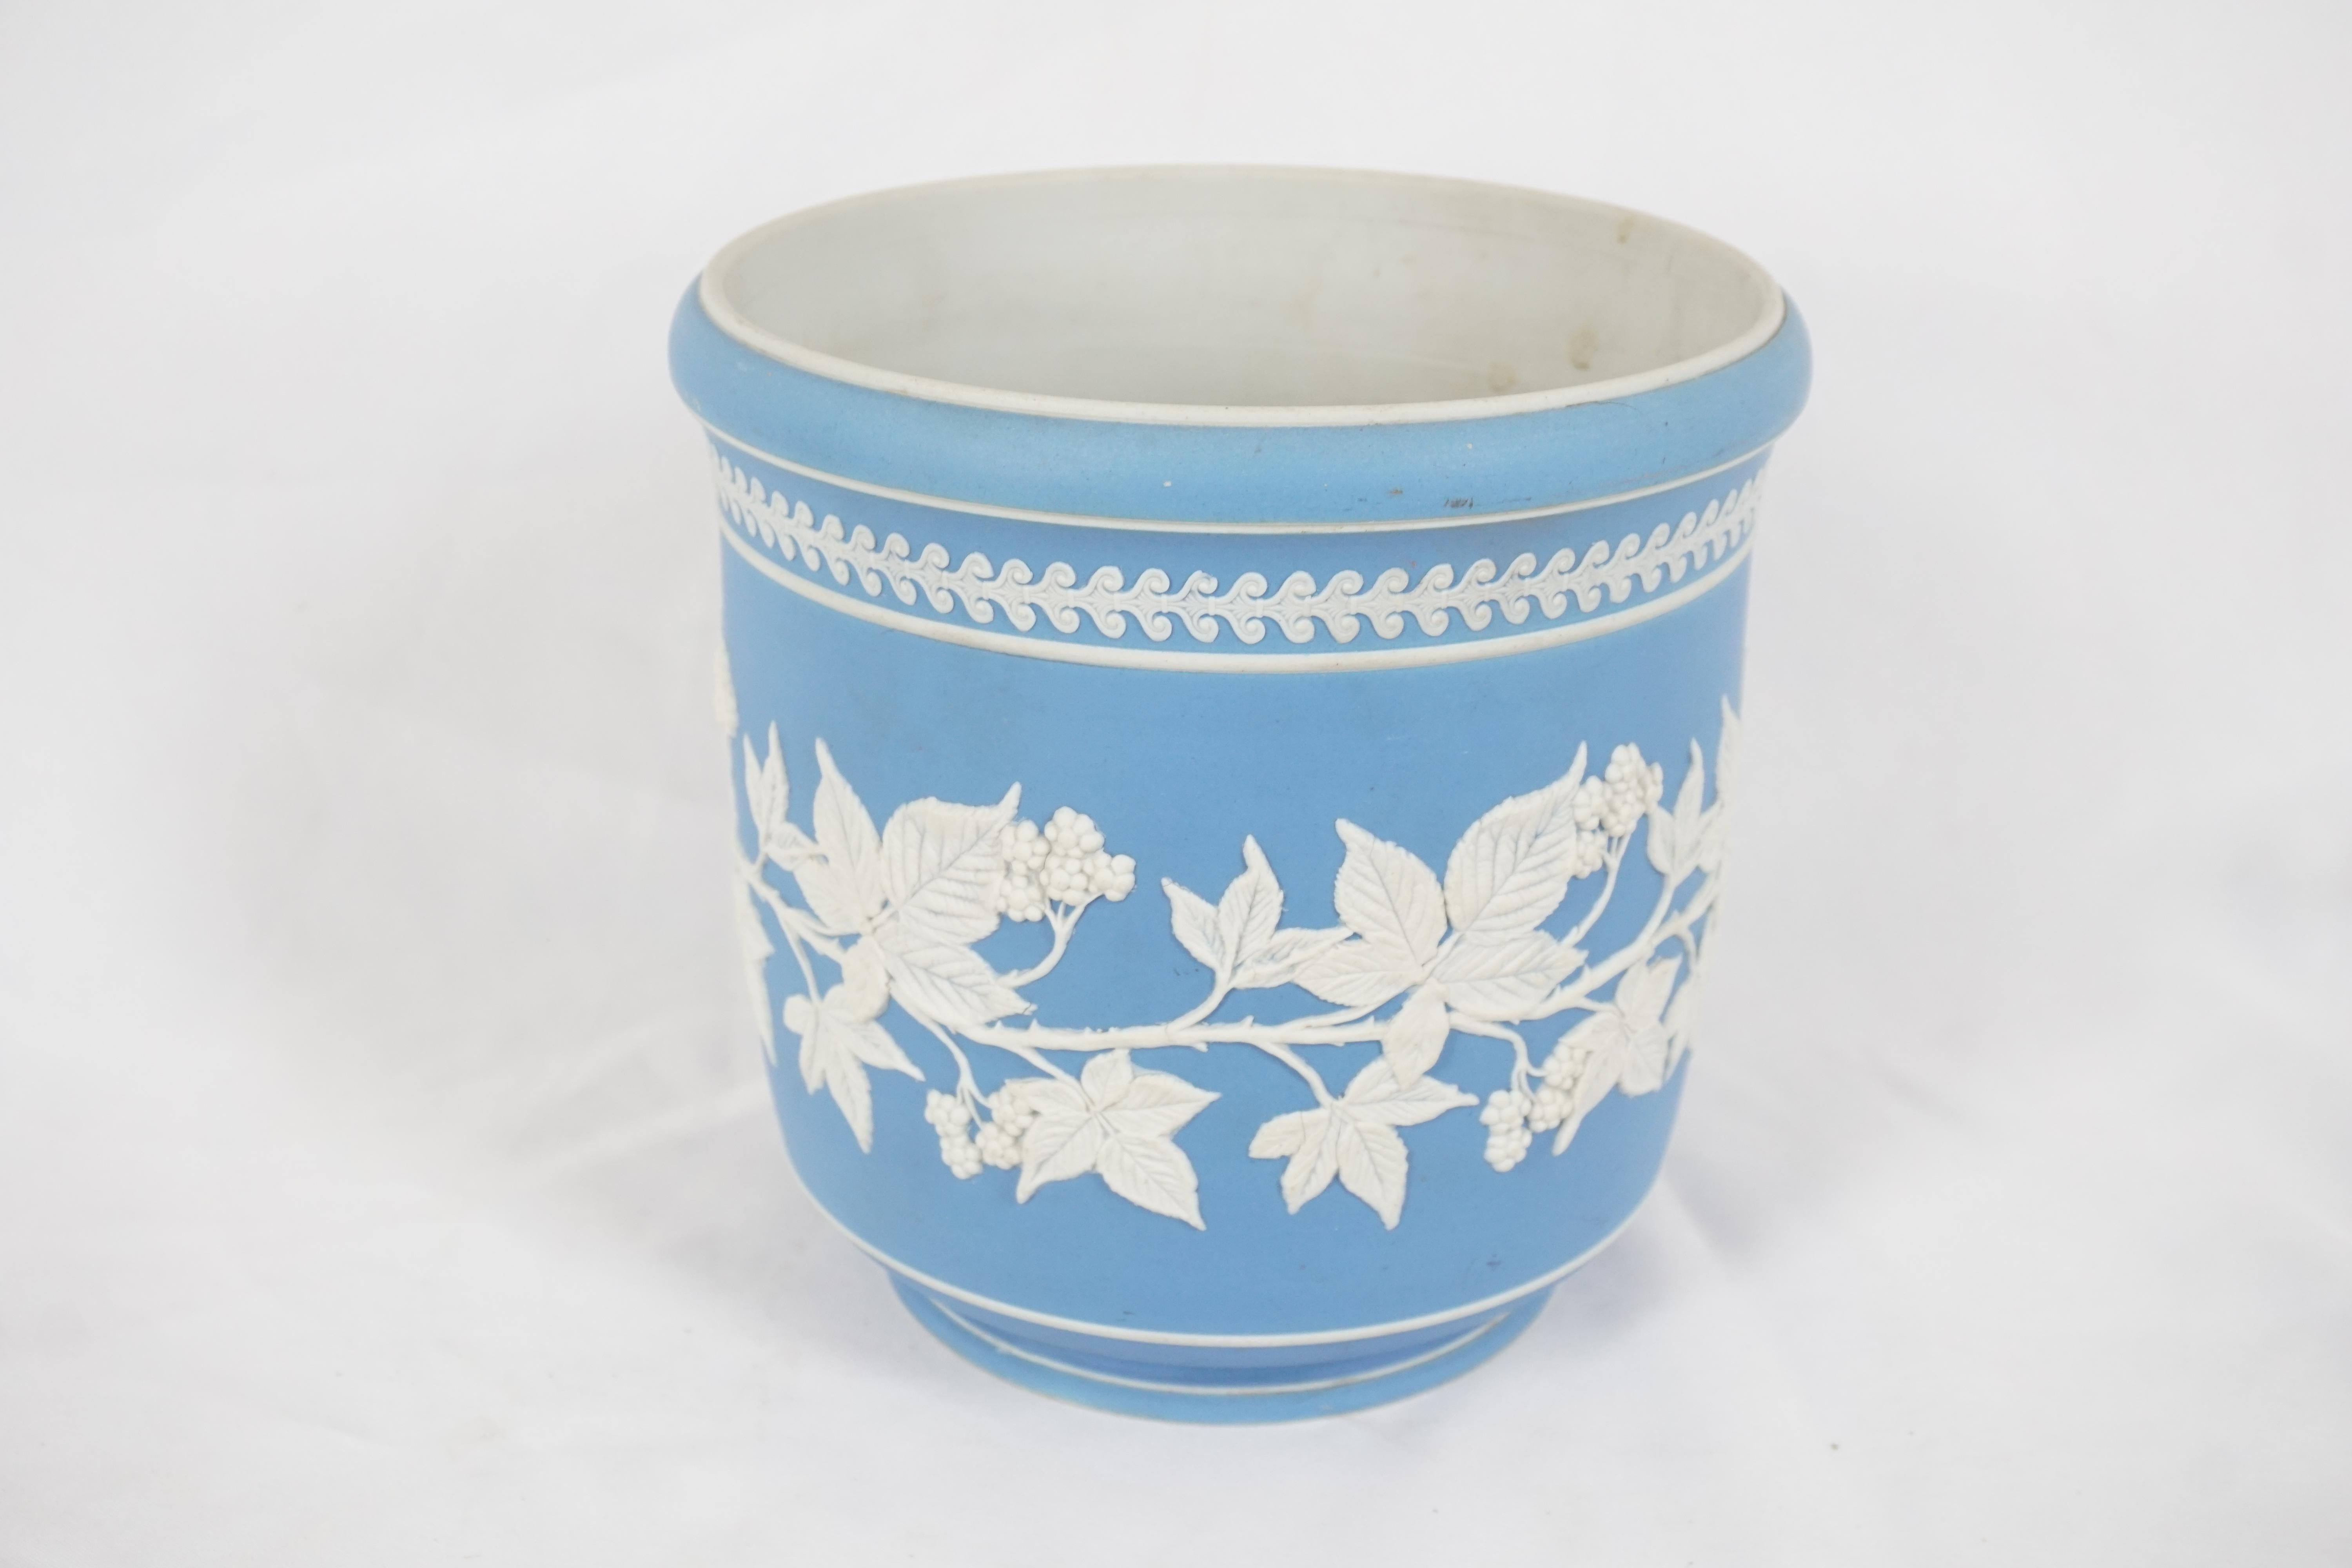 Vintage Light Blue Jardinière, Wedgewood Style, Scotland 1950's, B648 

Scotland 1950
Original finish
Jardinière with an applied flower and branches on a light blue background
Jardinière is in very good condition 

B648

Measures: 8